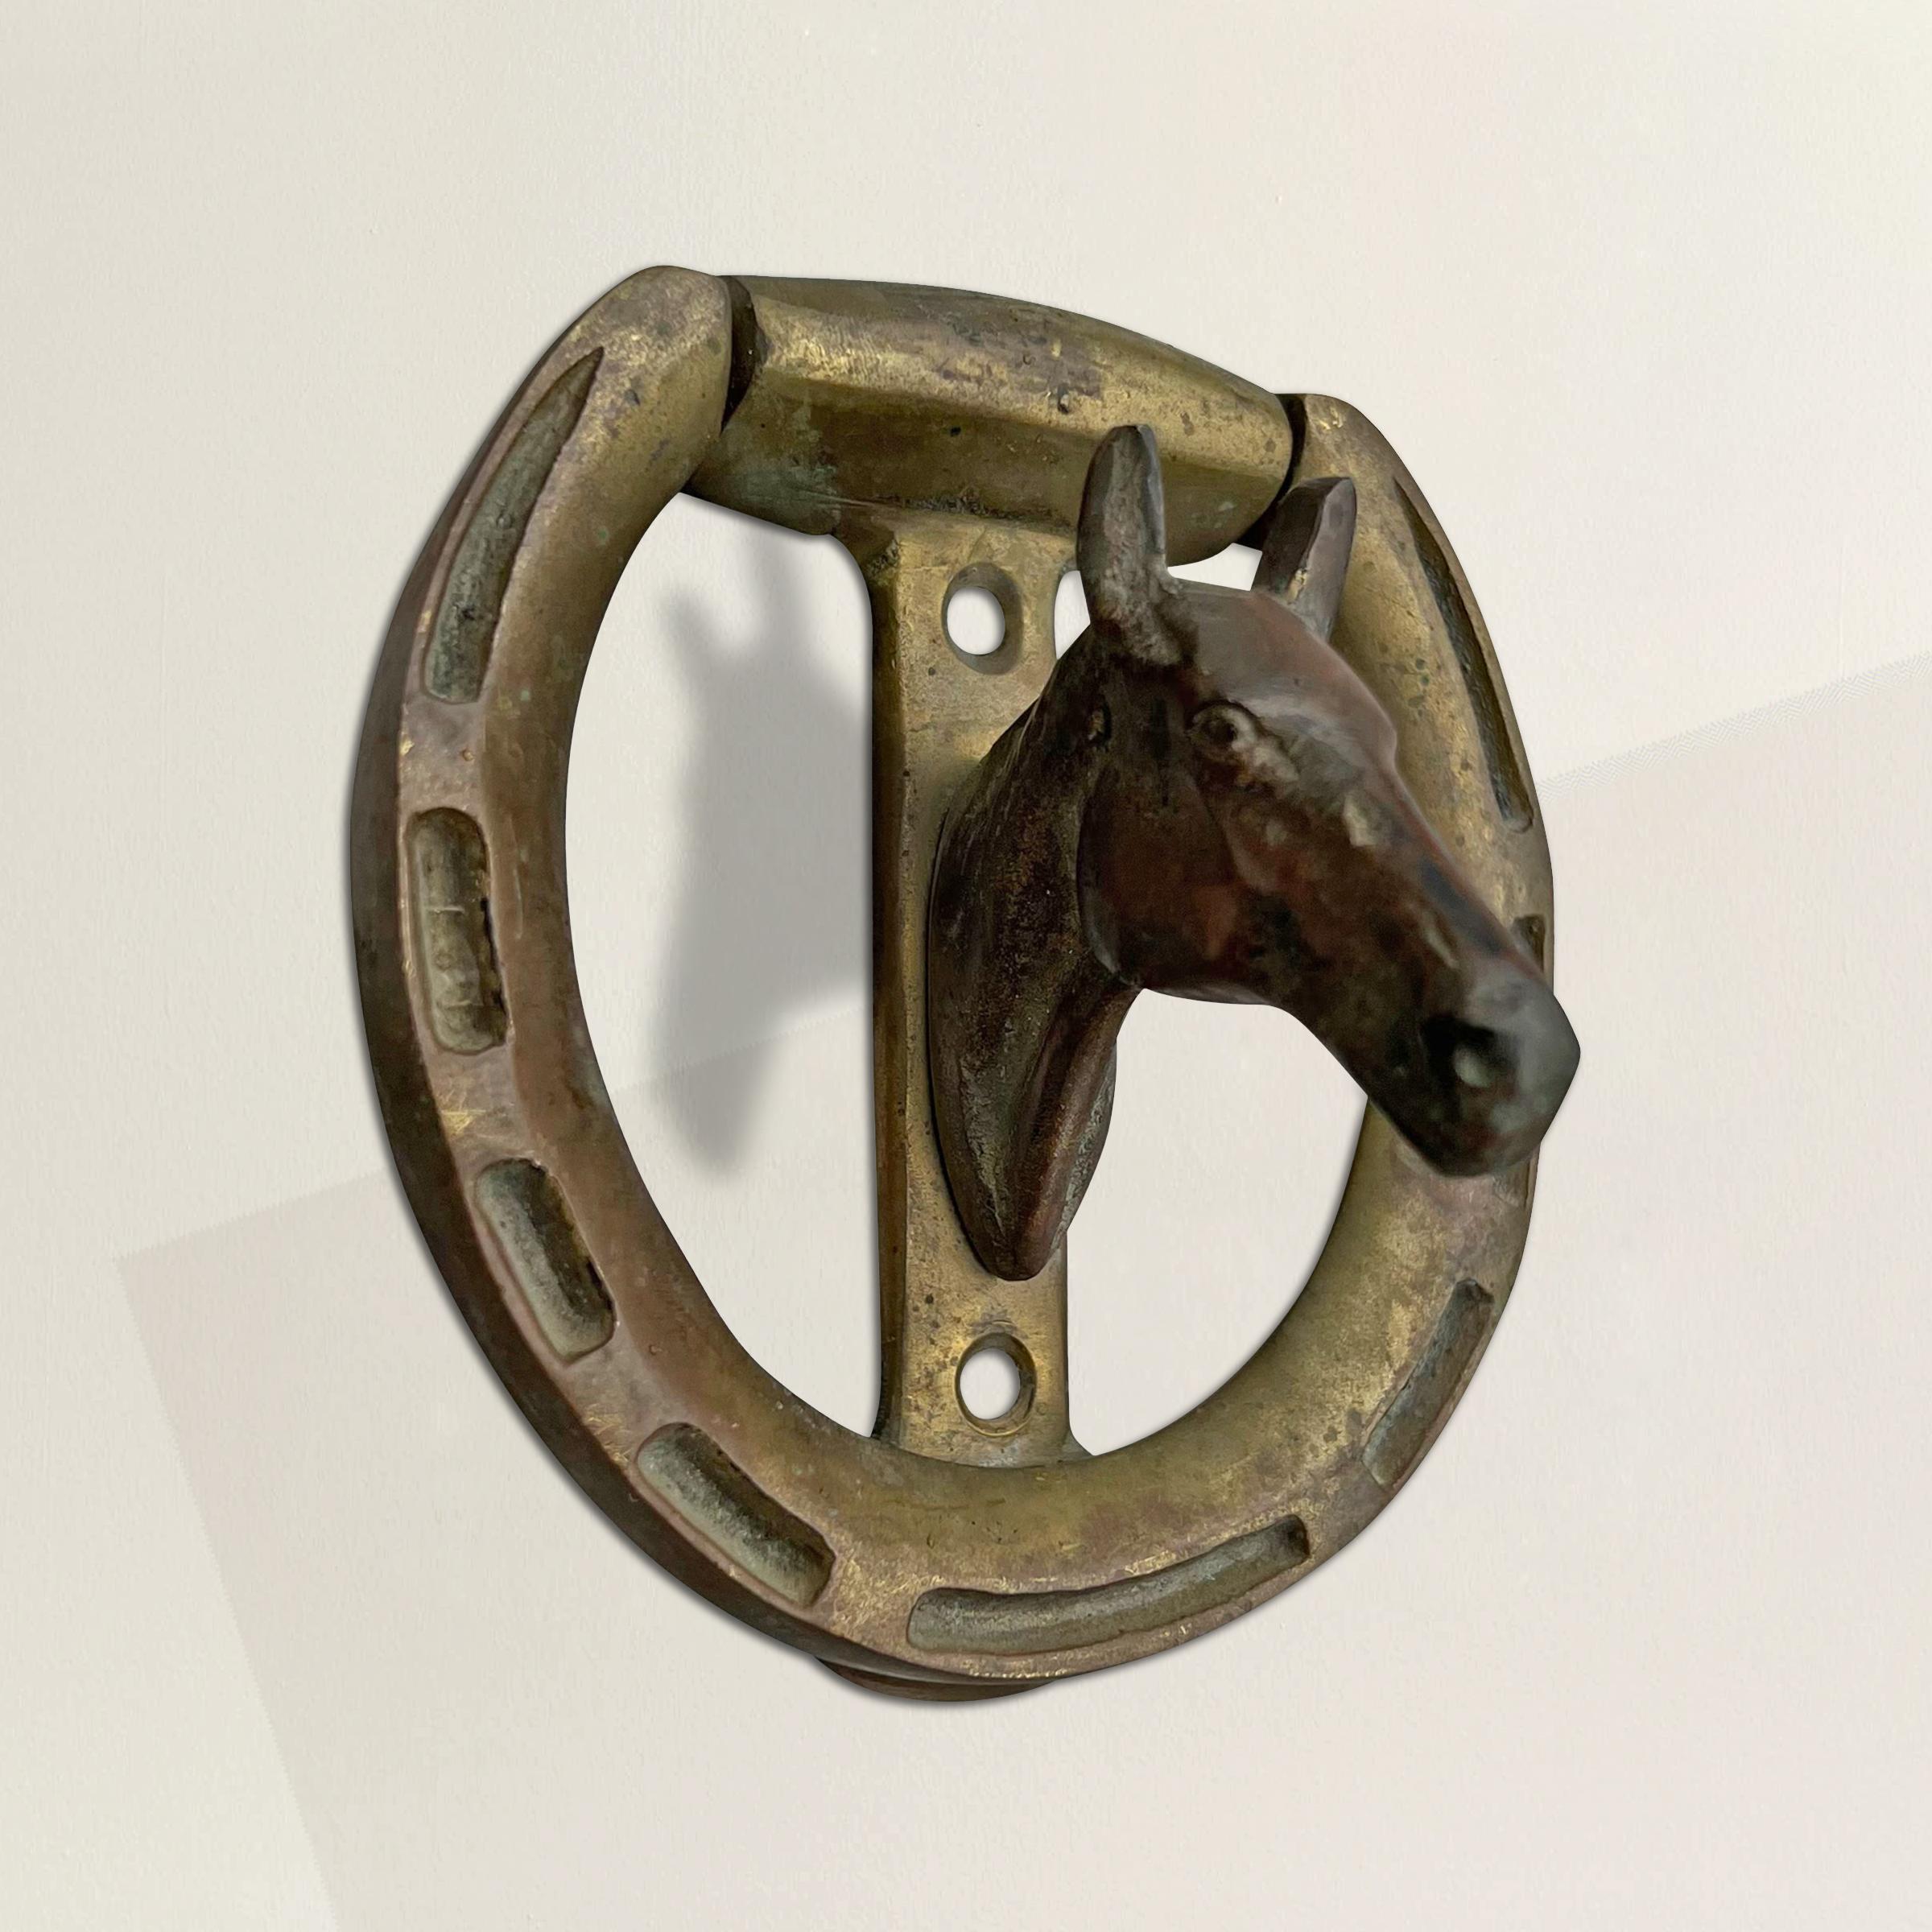 This vintage 20th-century English brass doorknocker is a stunning testament to the timeless allure of the equestrian lifestyle. The doorknocker features an intricately crafted horse head and horseshoe design, exuding a sense of strength, grace, and